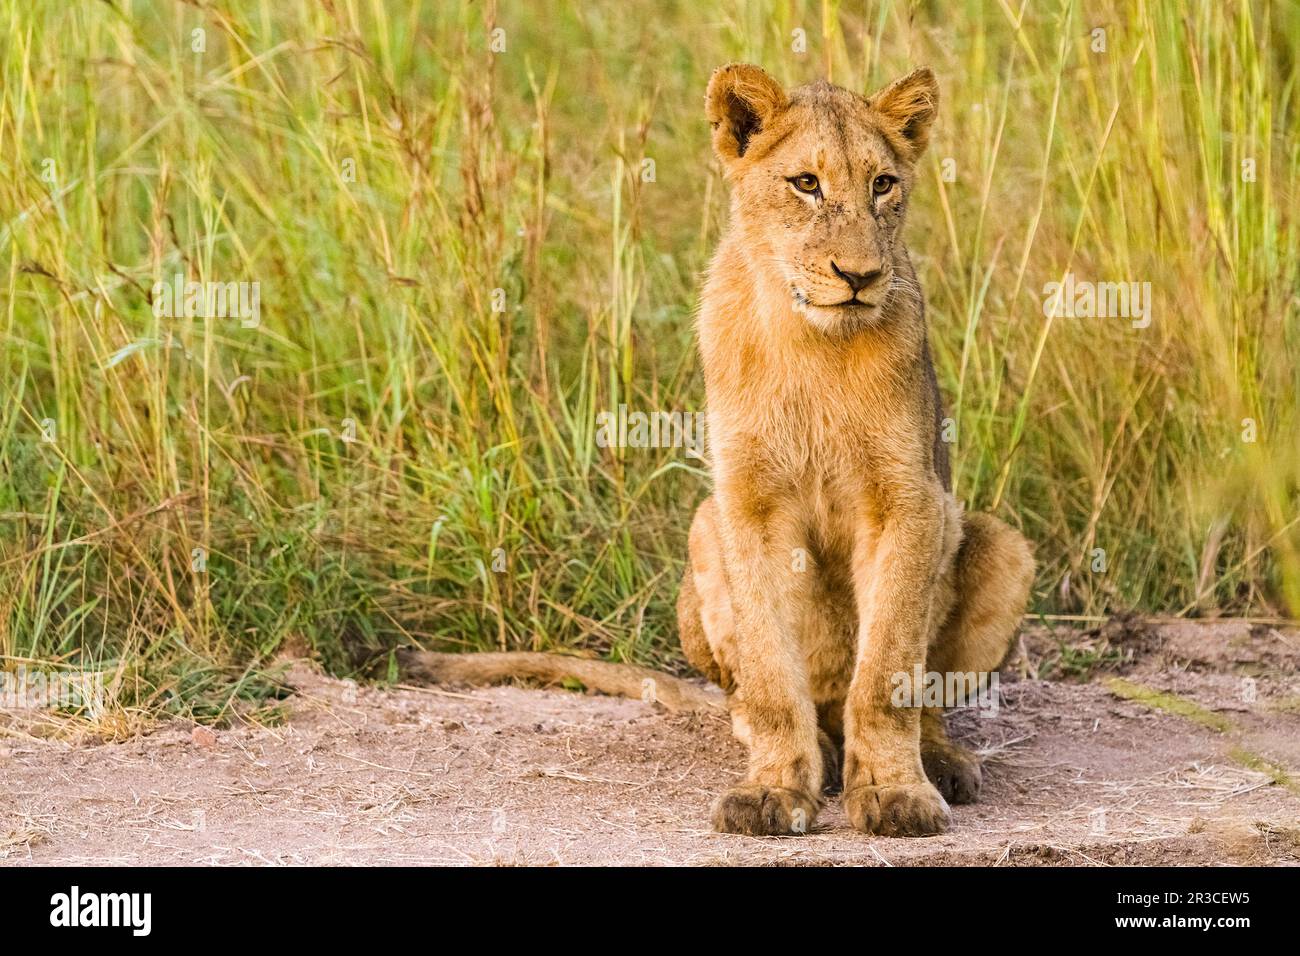 African Lion cub on a dirt road in a South African Game Reserve Stock Photo